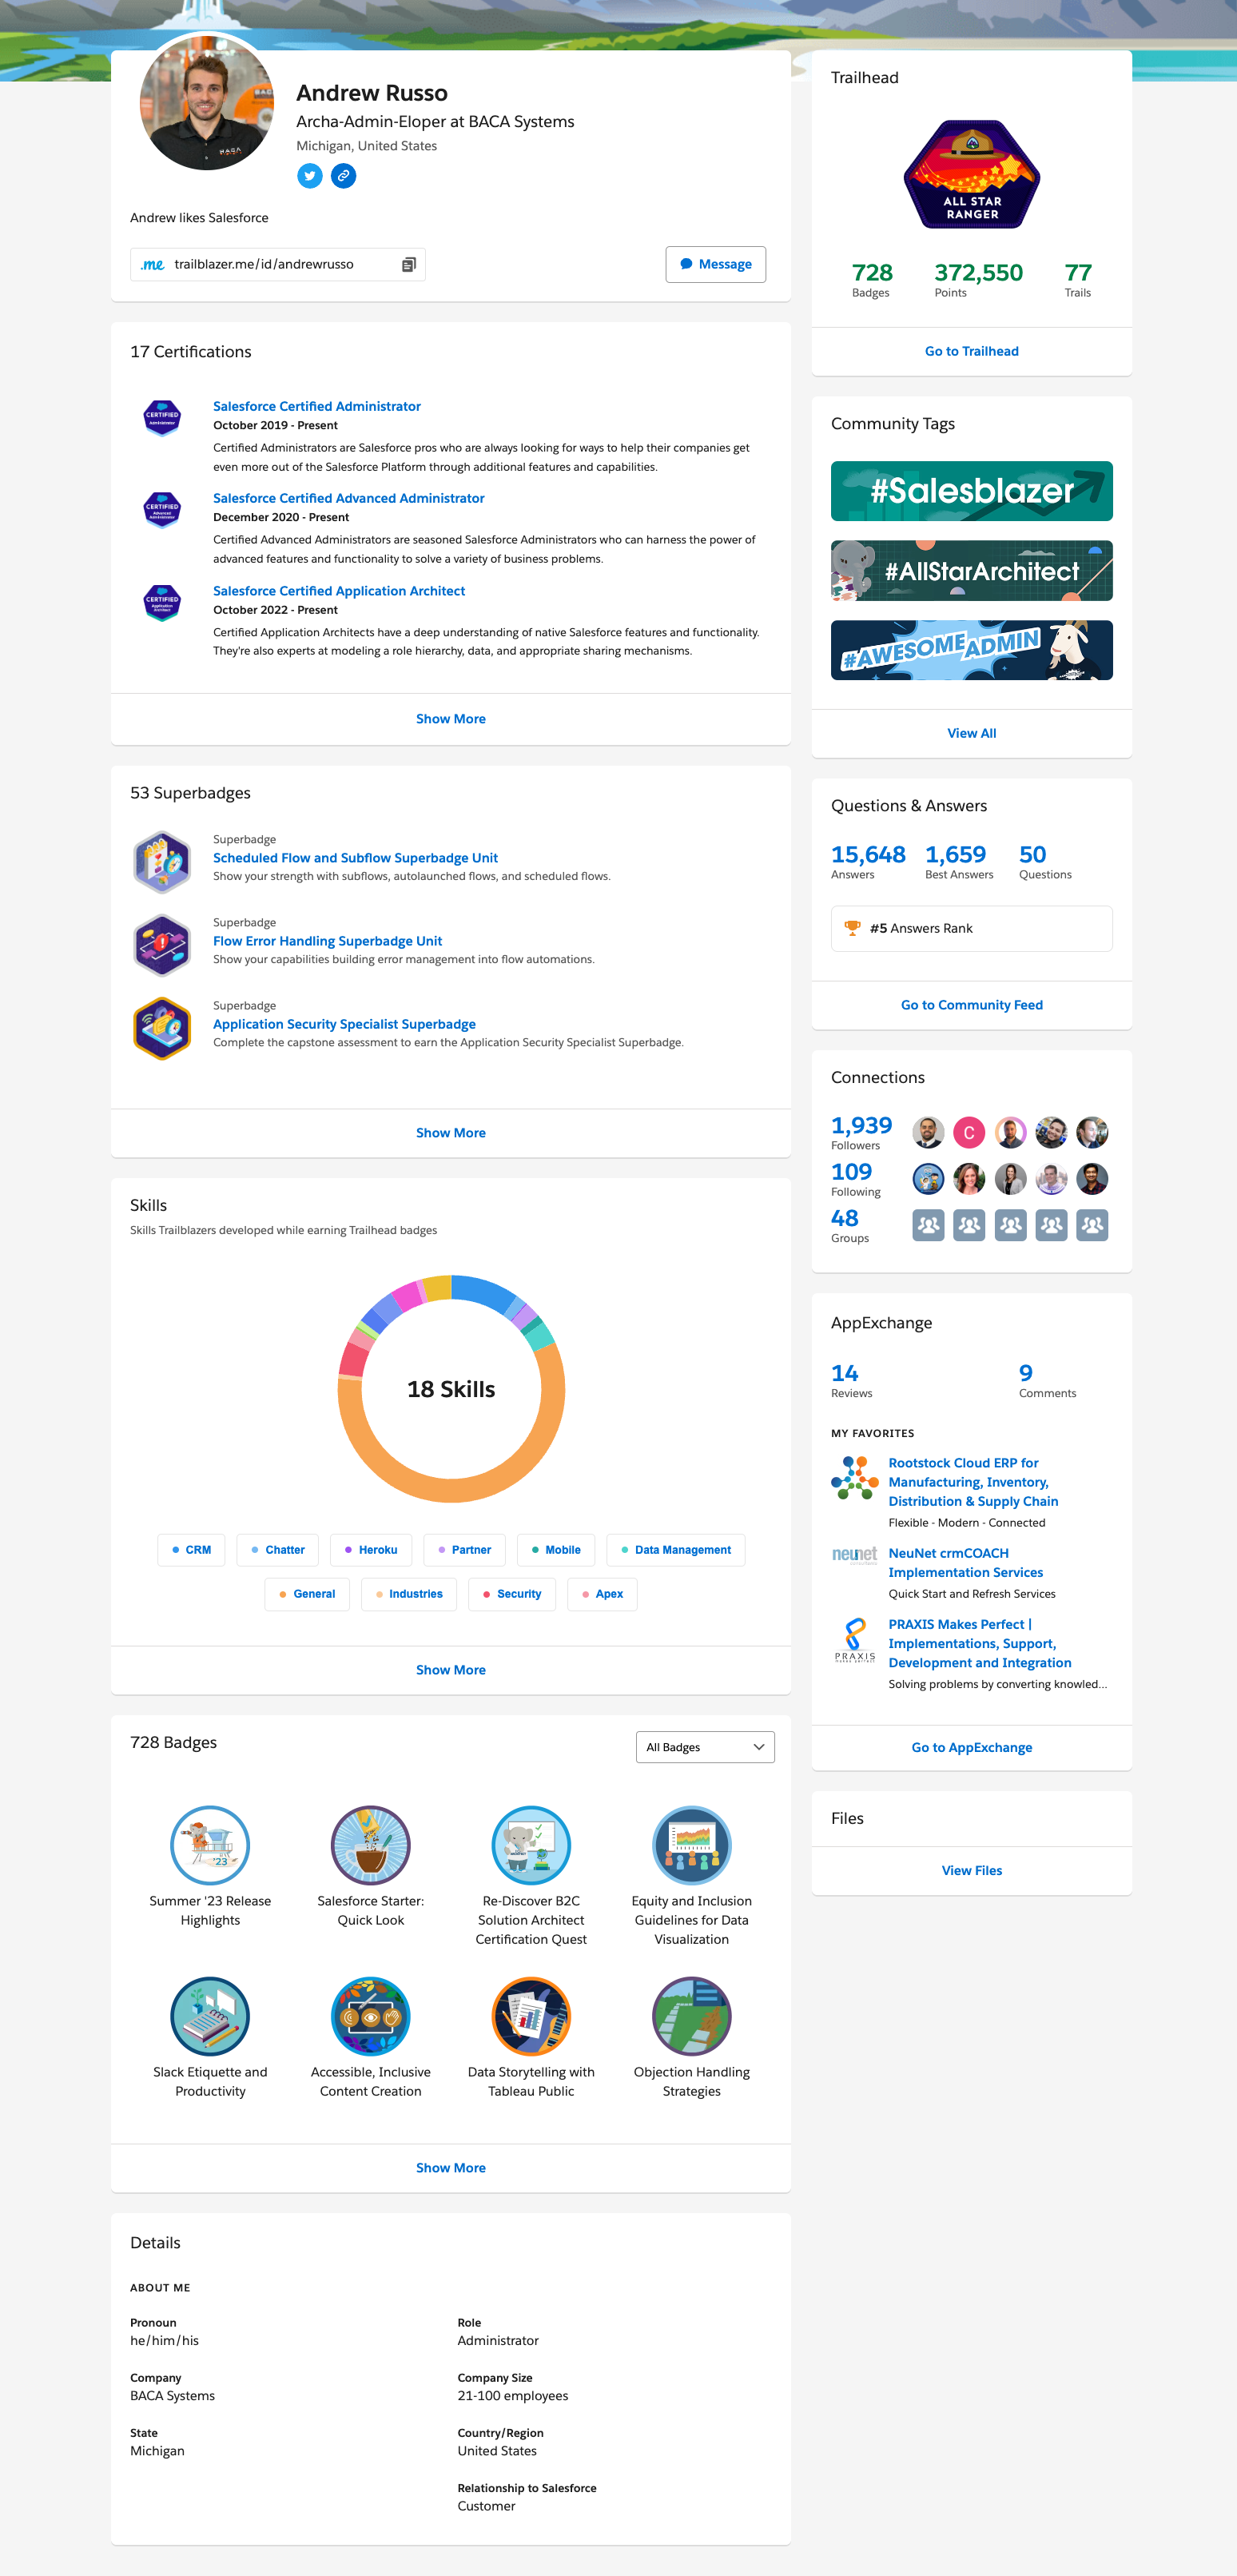 Profile of the salesforce community showing integration between different systmes